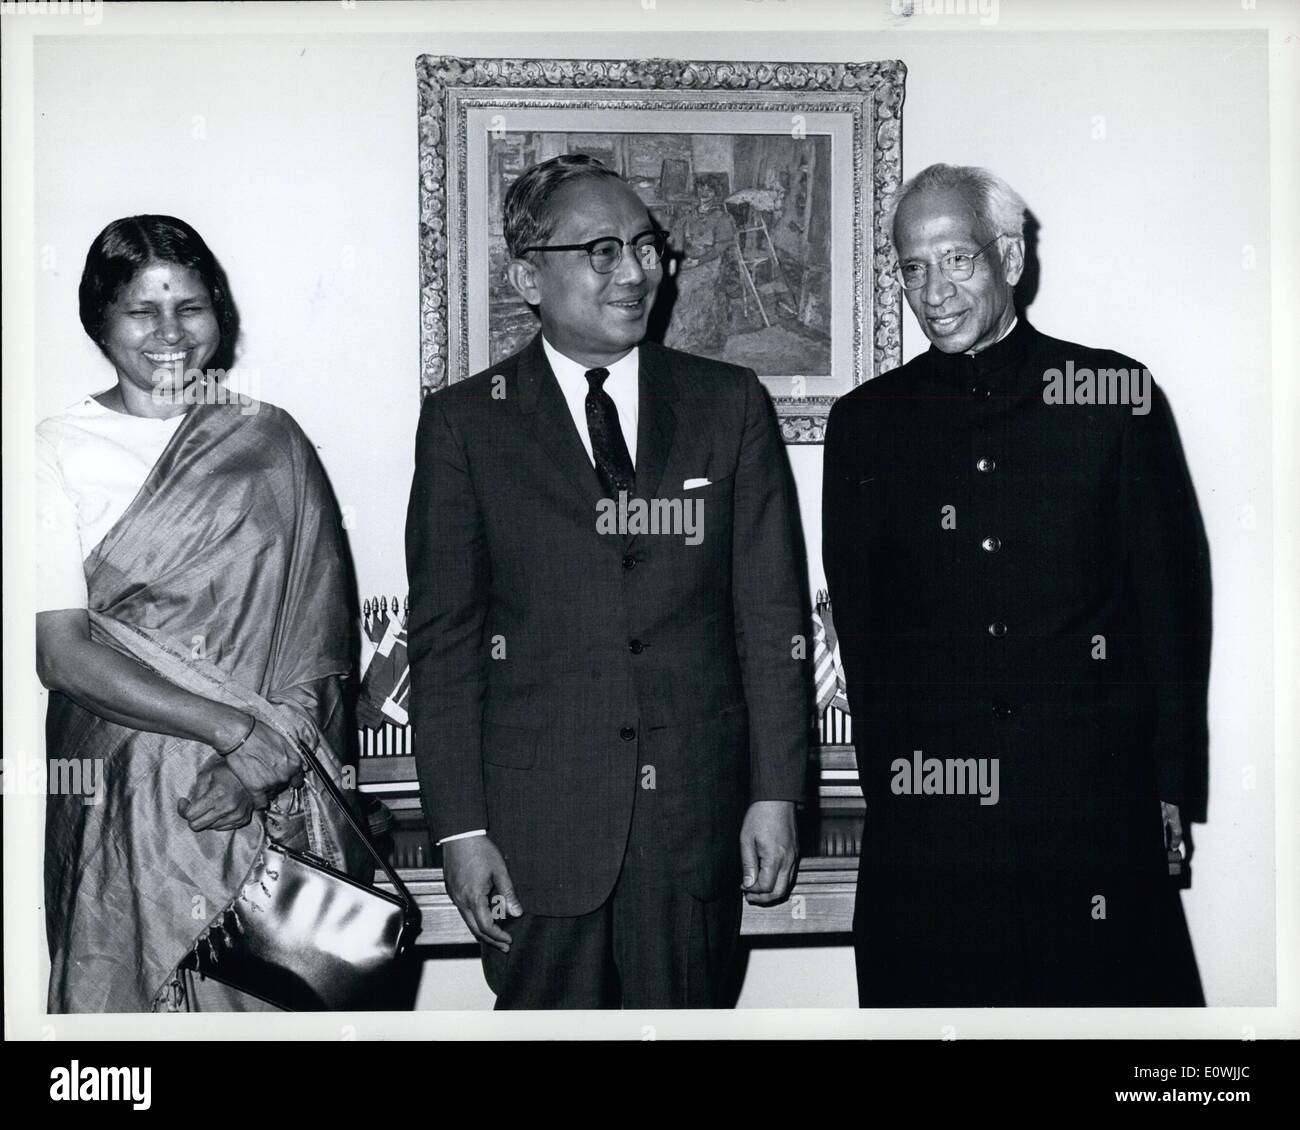 Jun. 06, 1963 - President of India visits United Nations Headquarters: The President of the Republic of India, Sarvepalli Radhakrishnan, paid an official visit to United Nations Headquarters today. The Indian President was accompanied by Mrs. Lakshmi N, Menon,Minister of State for External Affairs, and Ambassador B.N Chakravarty, Permanent Representative of India to the United Nations. President Radhakrishnan (right), is seen here with Secretary General U Thant, and Mrs. Lakshmi N. Menon. Stock Photo